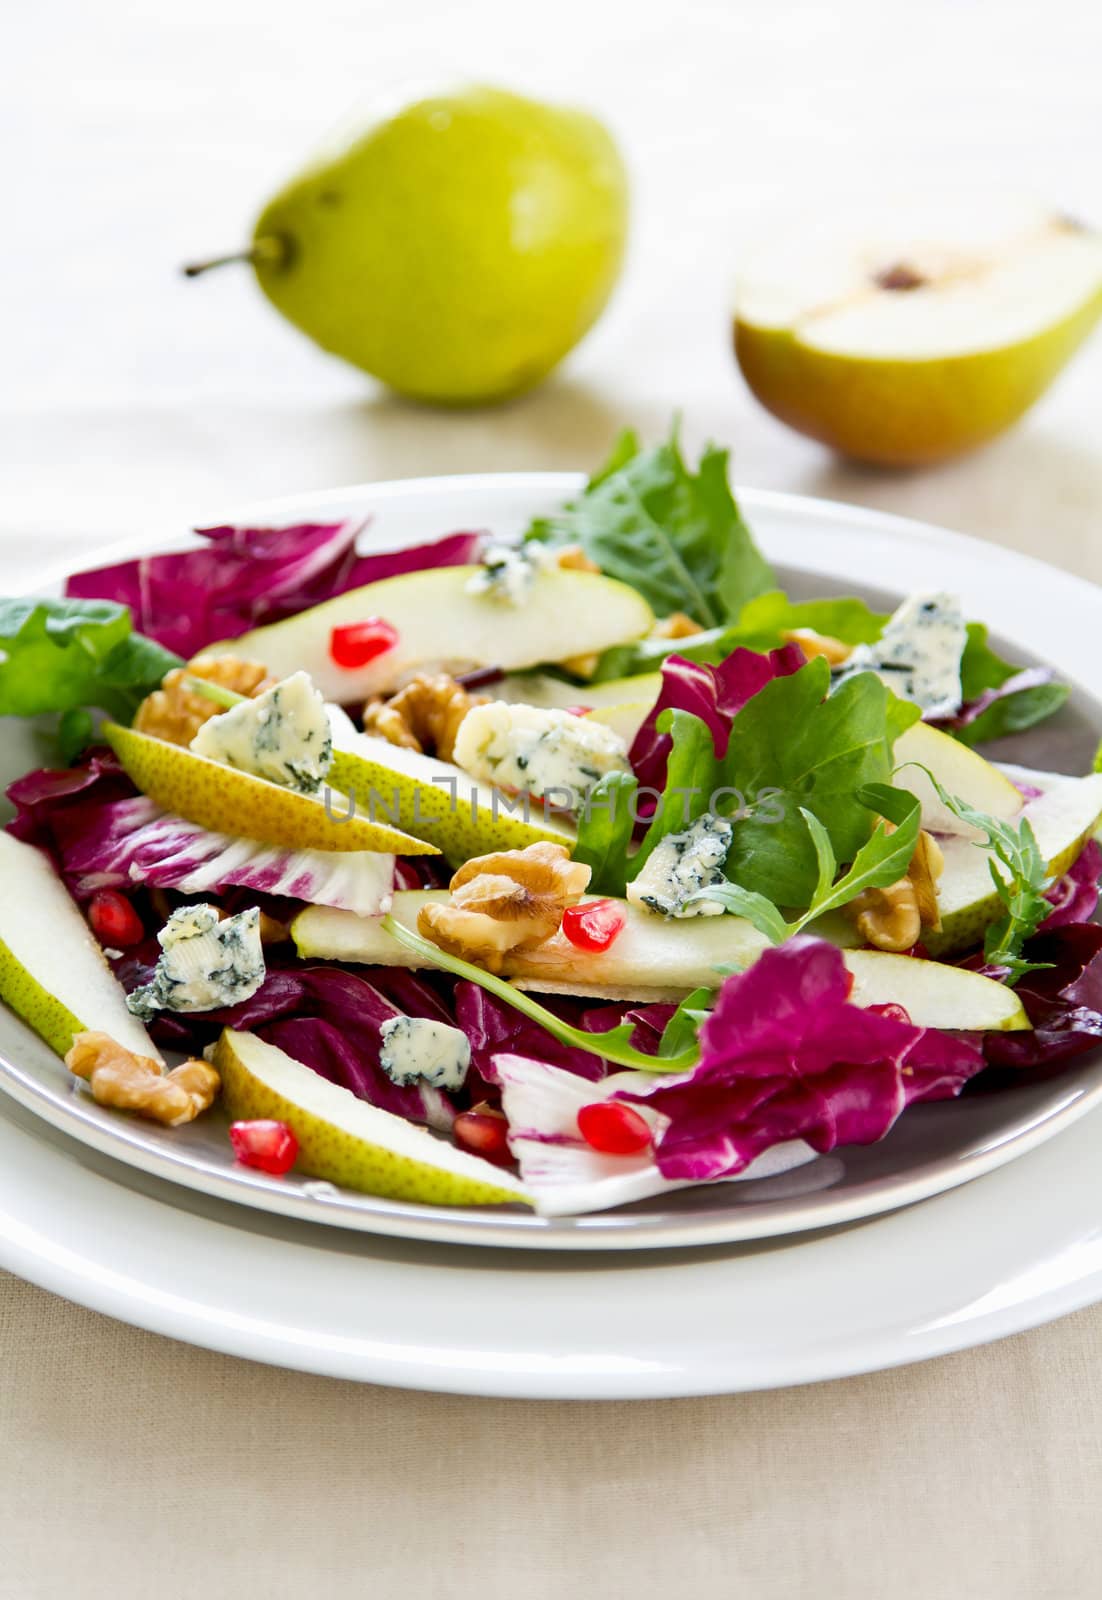 Pear with Blue cheese,walnut and Radicchio salad by vanillaechoes